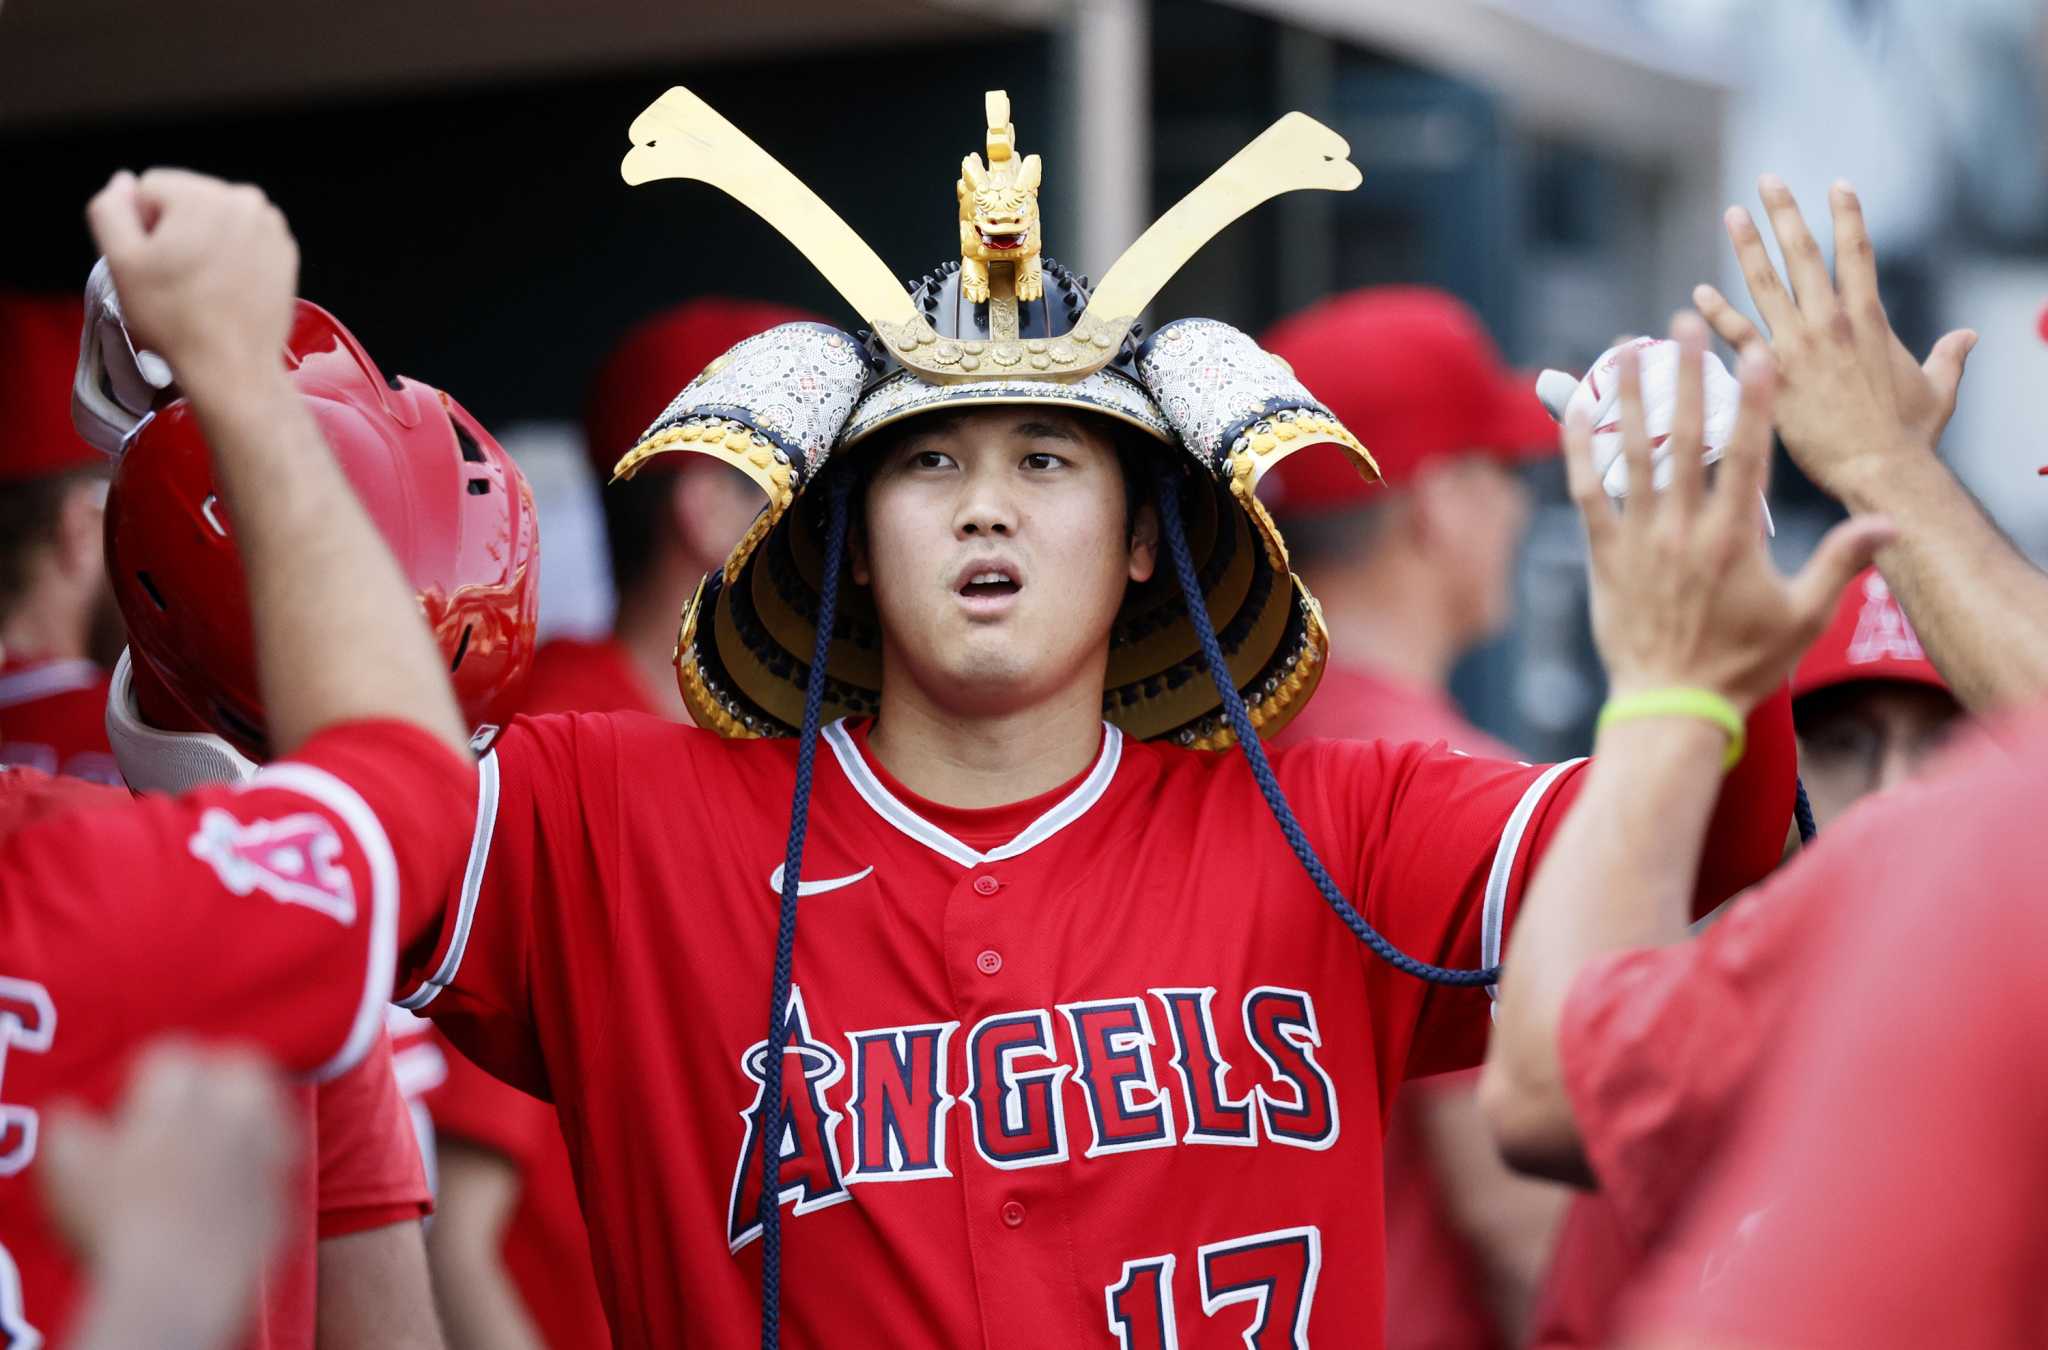 Shohei Ohtani wants to win. Can the Giants convince him they do, too?